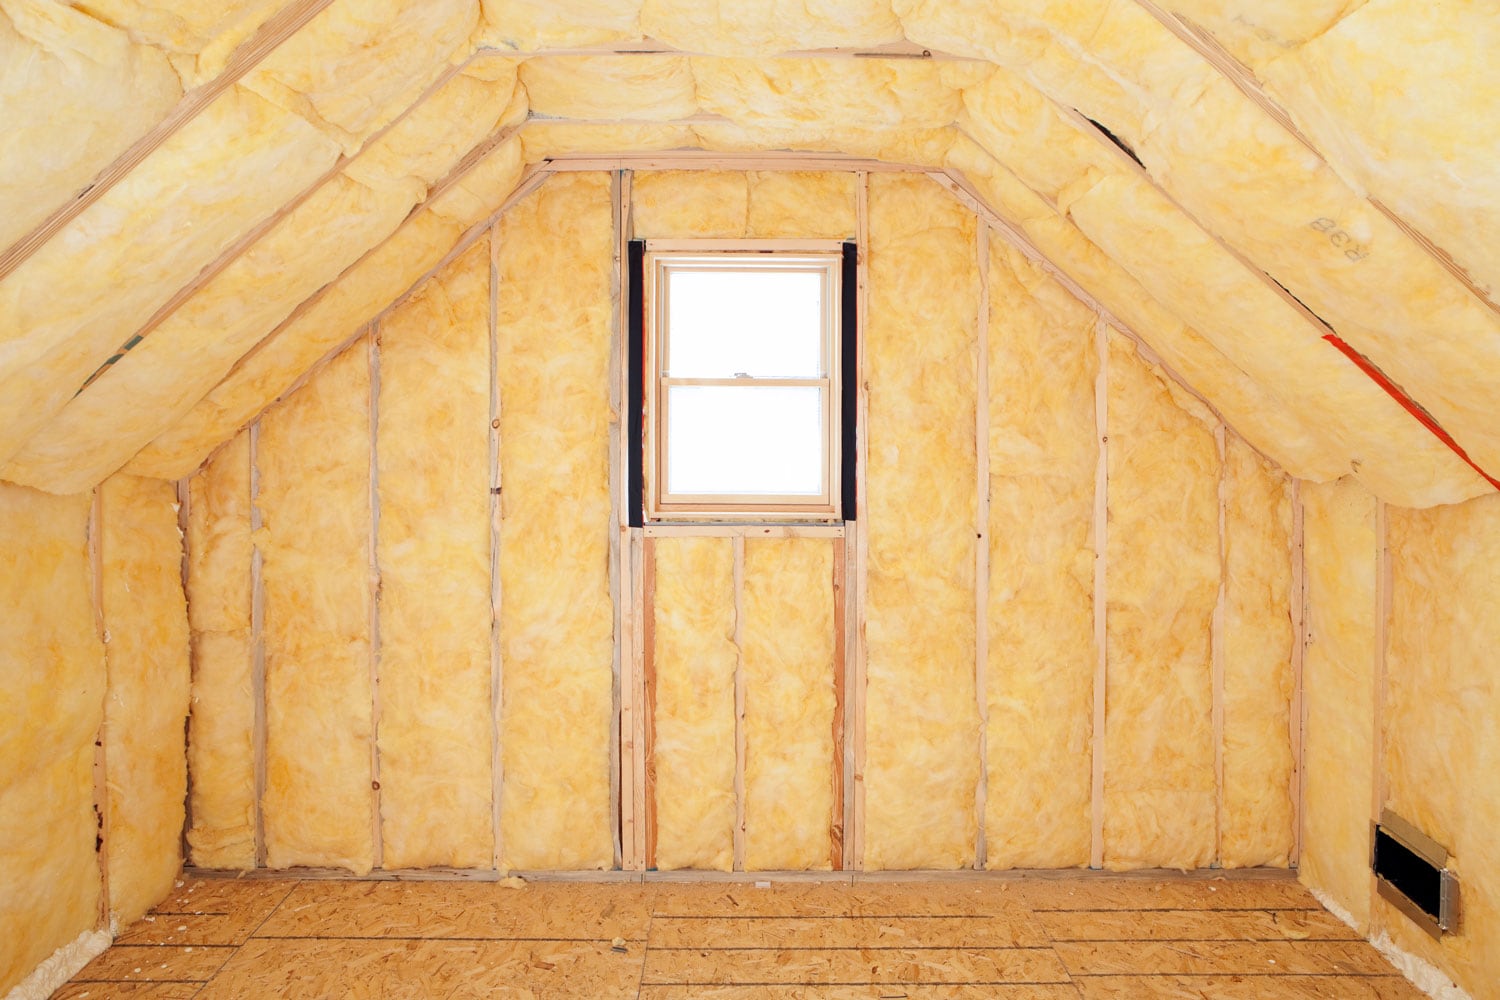 An attic with thermal insulation